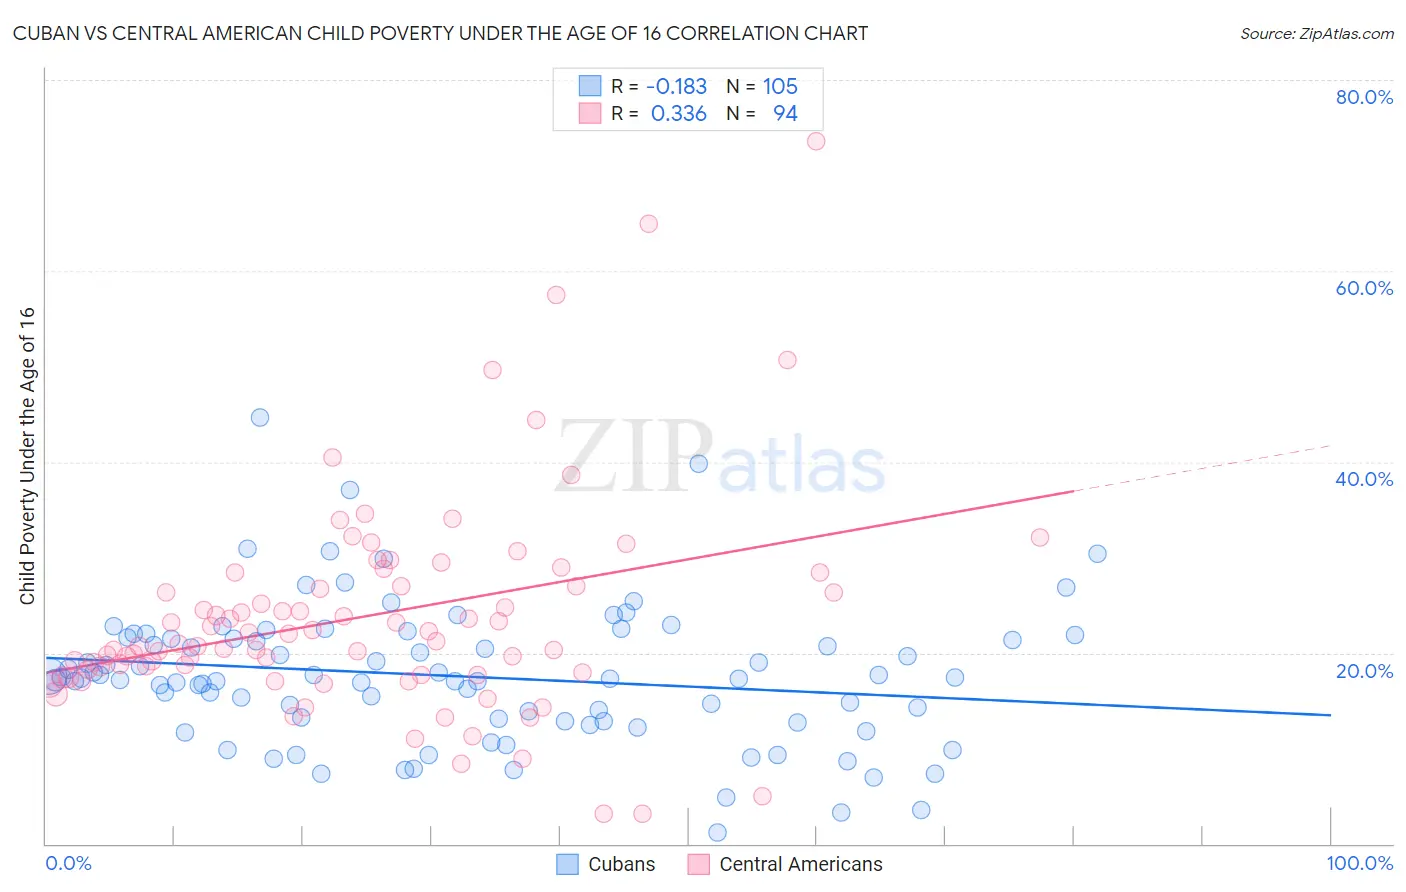 Cuban vs Central American Child Poverty Under the Age of 16